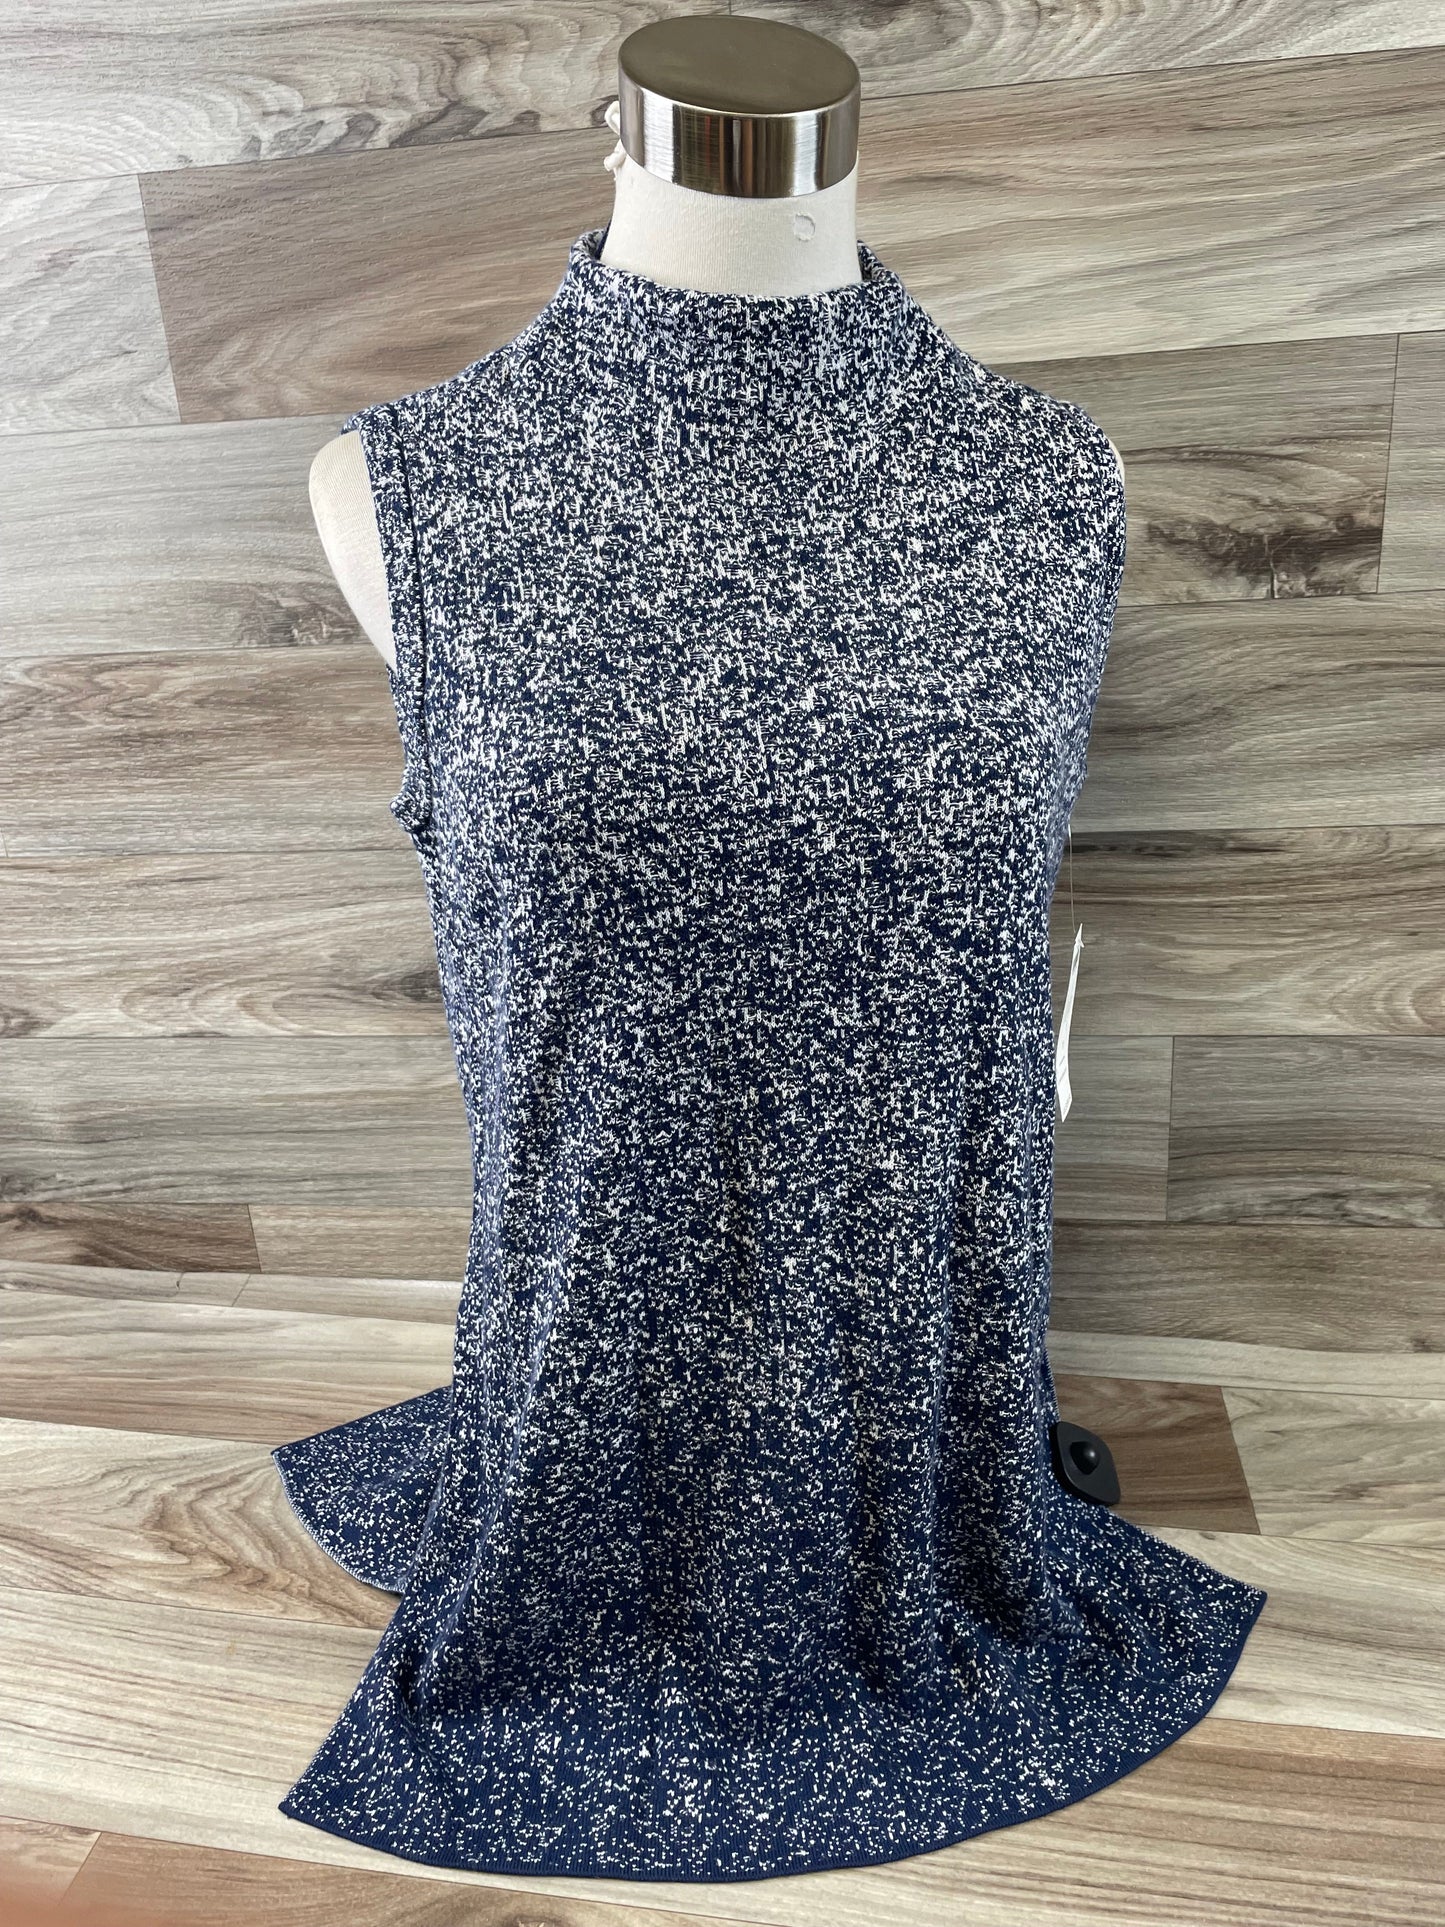 Blue & White Top Sleeveless Zenergy By Chicos, Size M